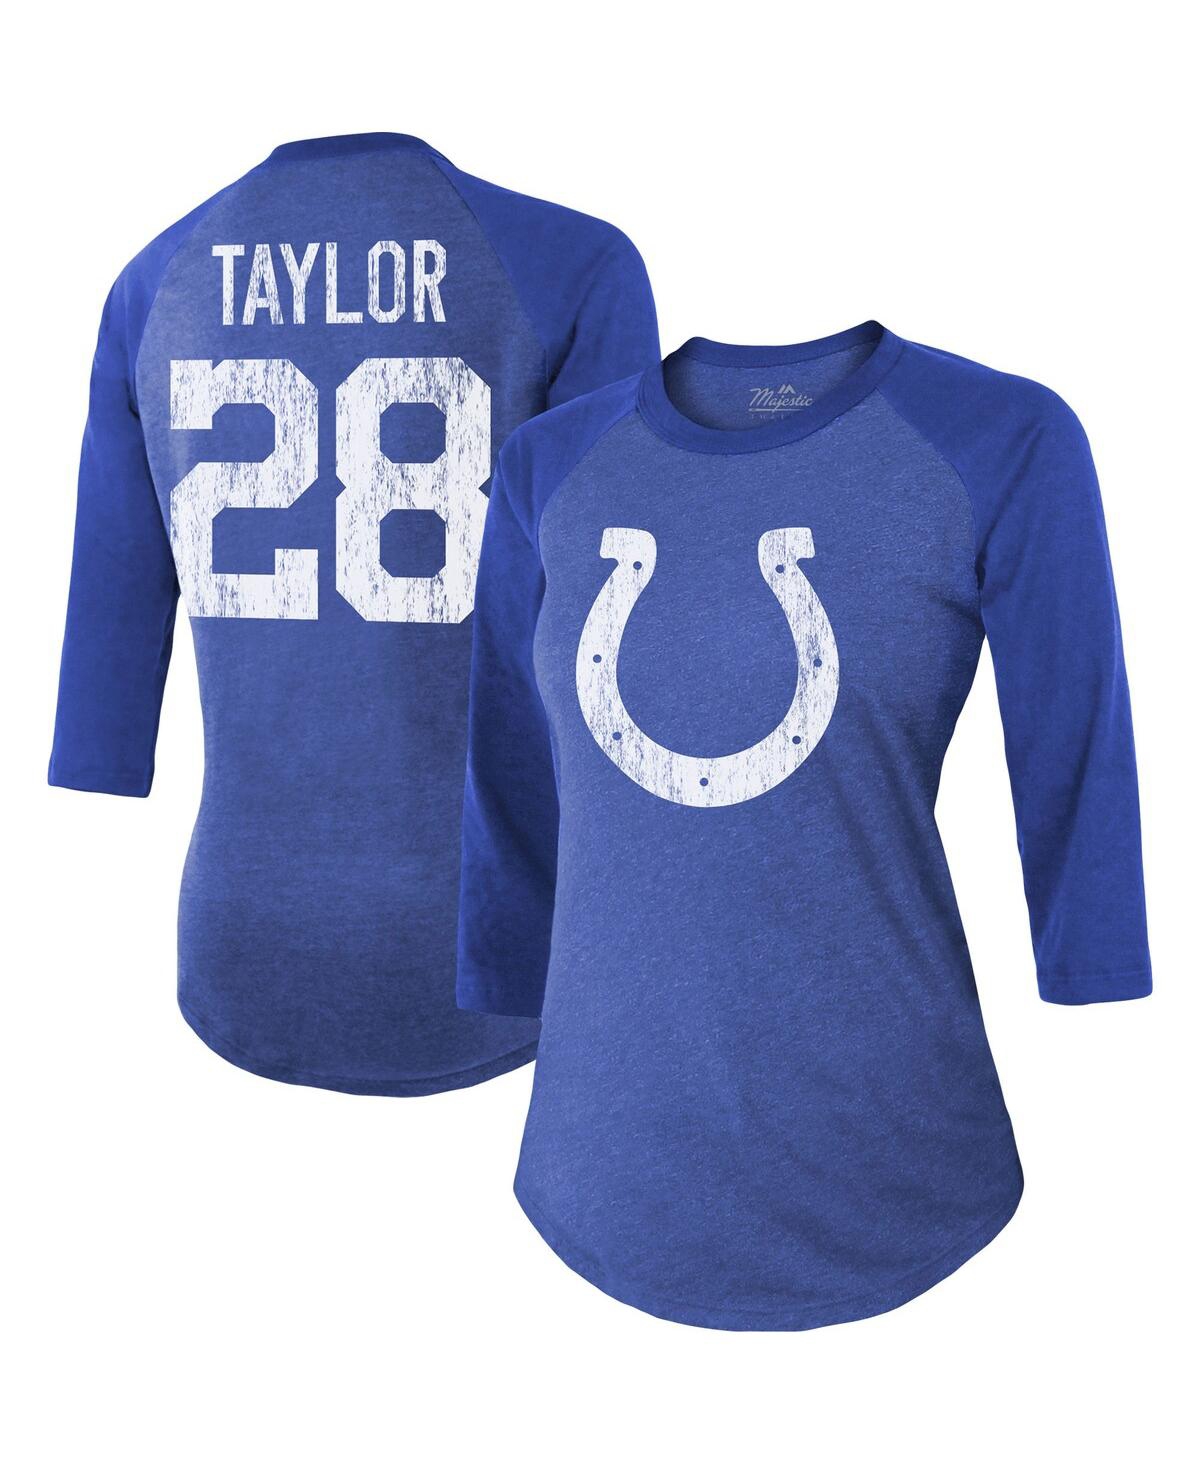 Shop Majestic Women's  Threads Jonathan Taylor Royal Indianapolis Colts Player Name And Number Raglan Tri-